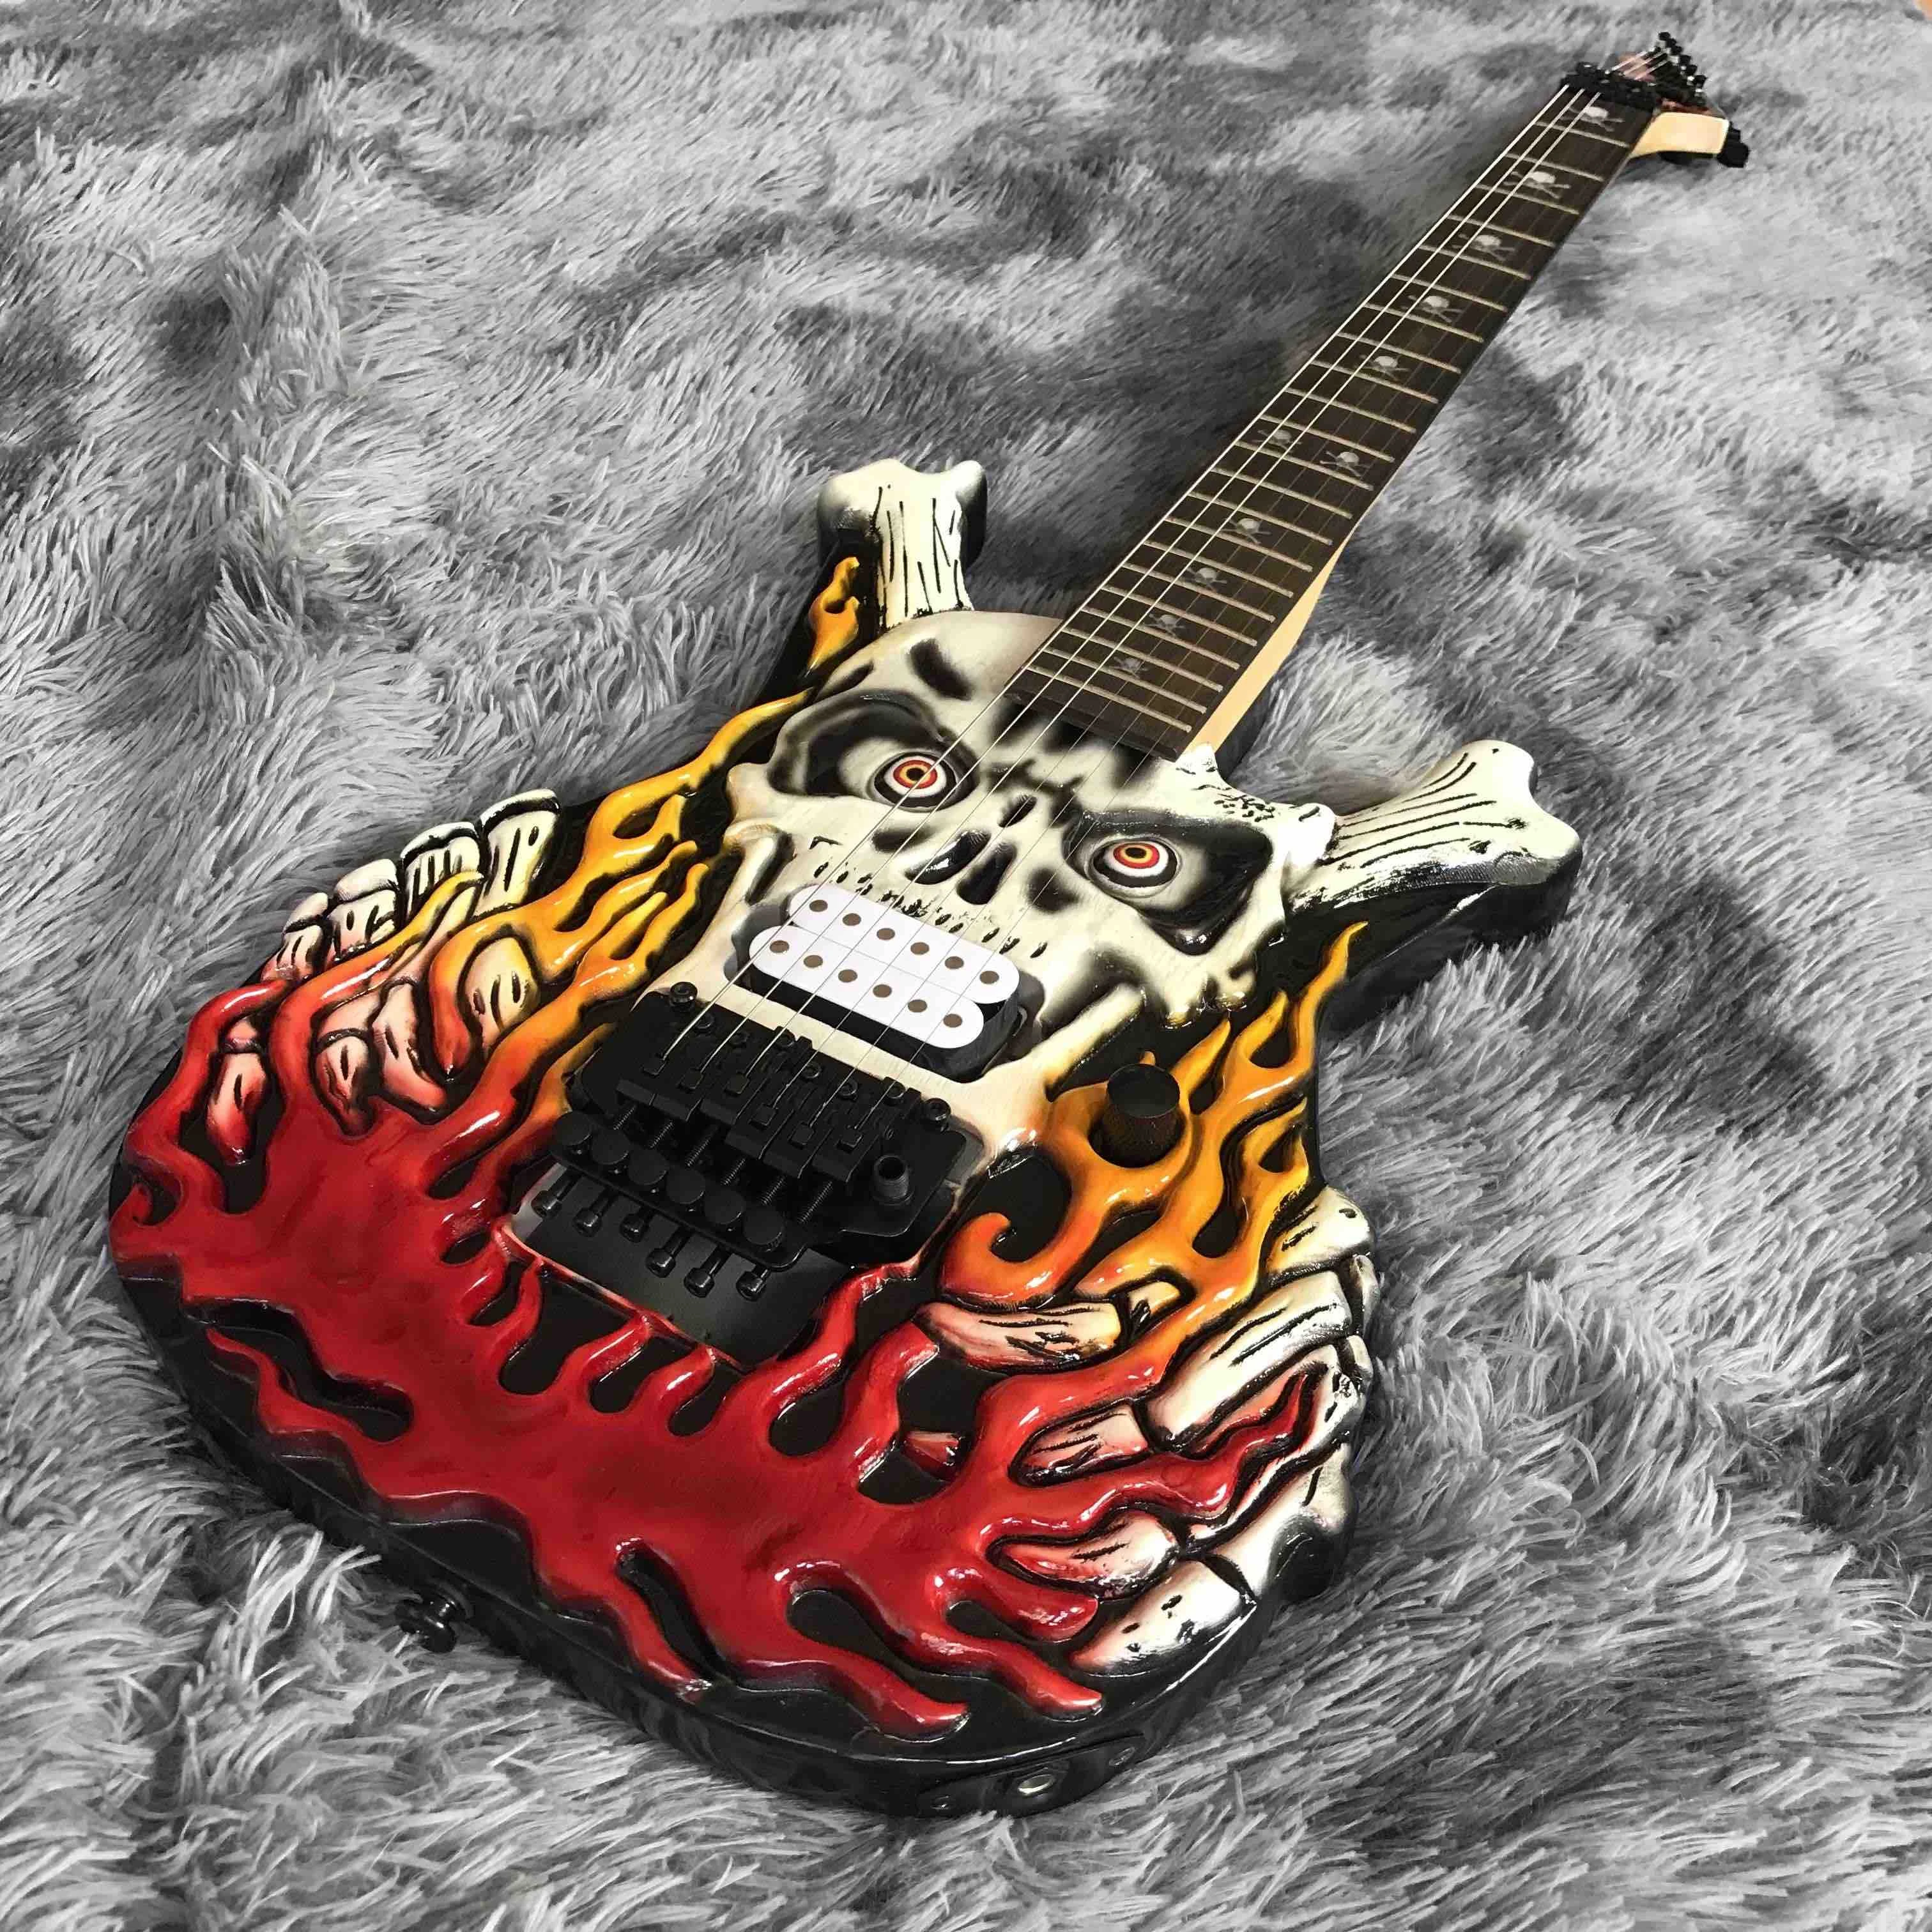 Custom Irregular Special Body Shape Skulskeleton Ep Style Electric Guitar  In Kinds Colors - Electric Guitar - AliExpress